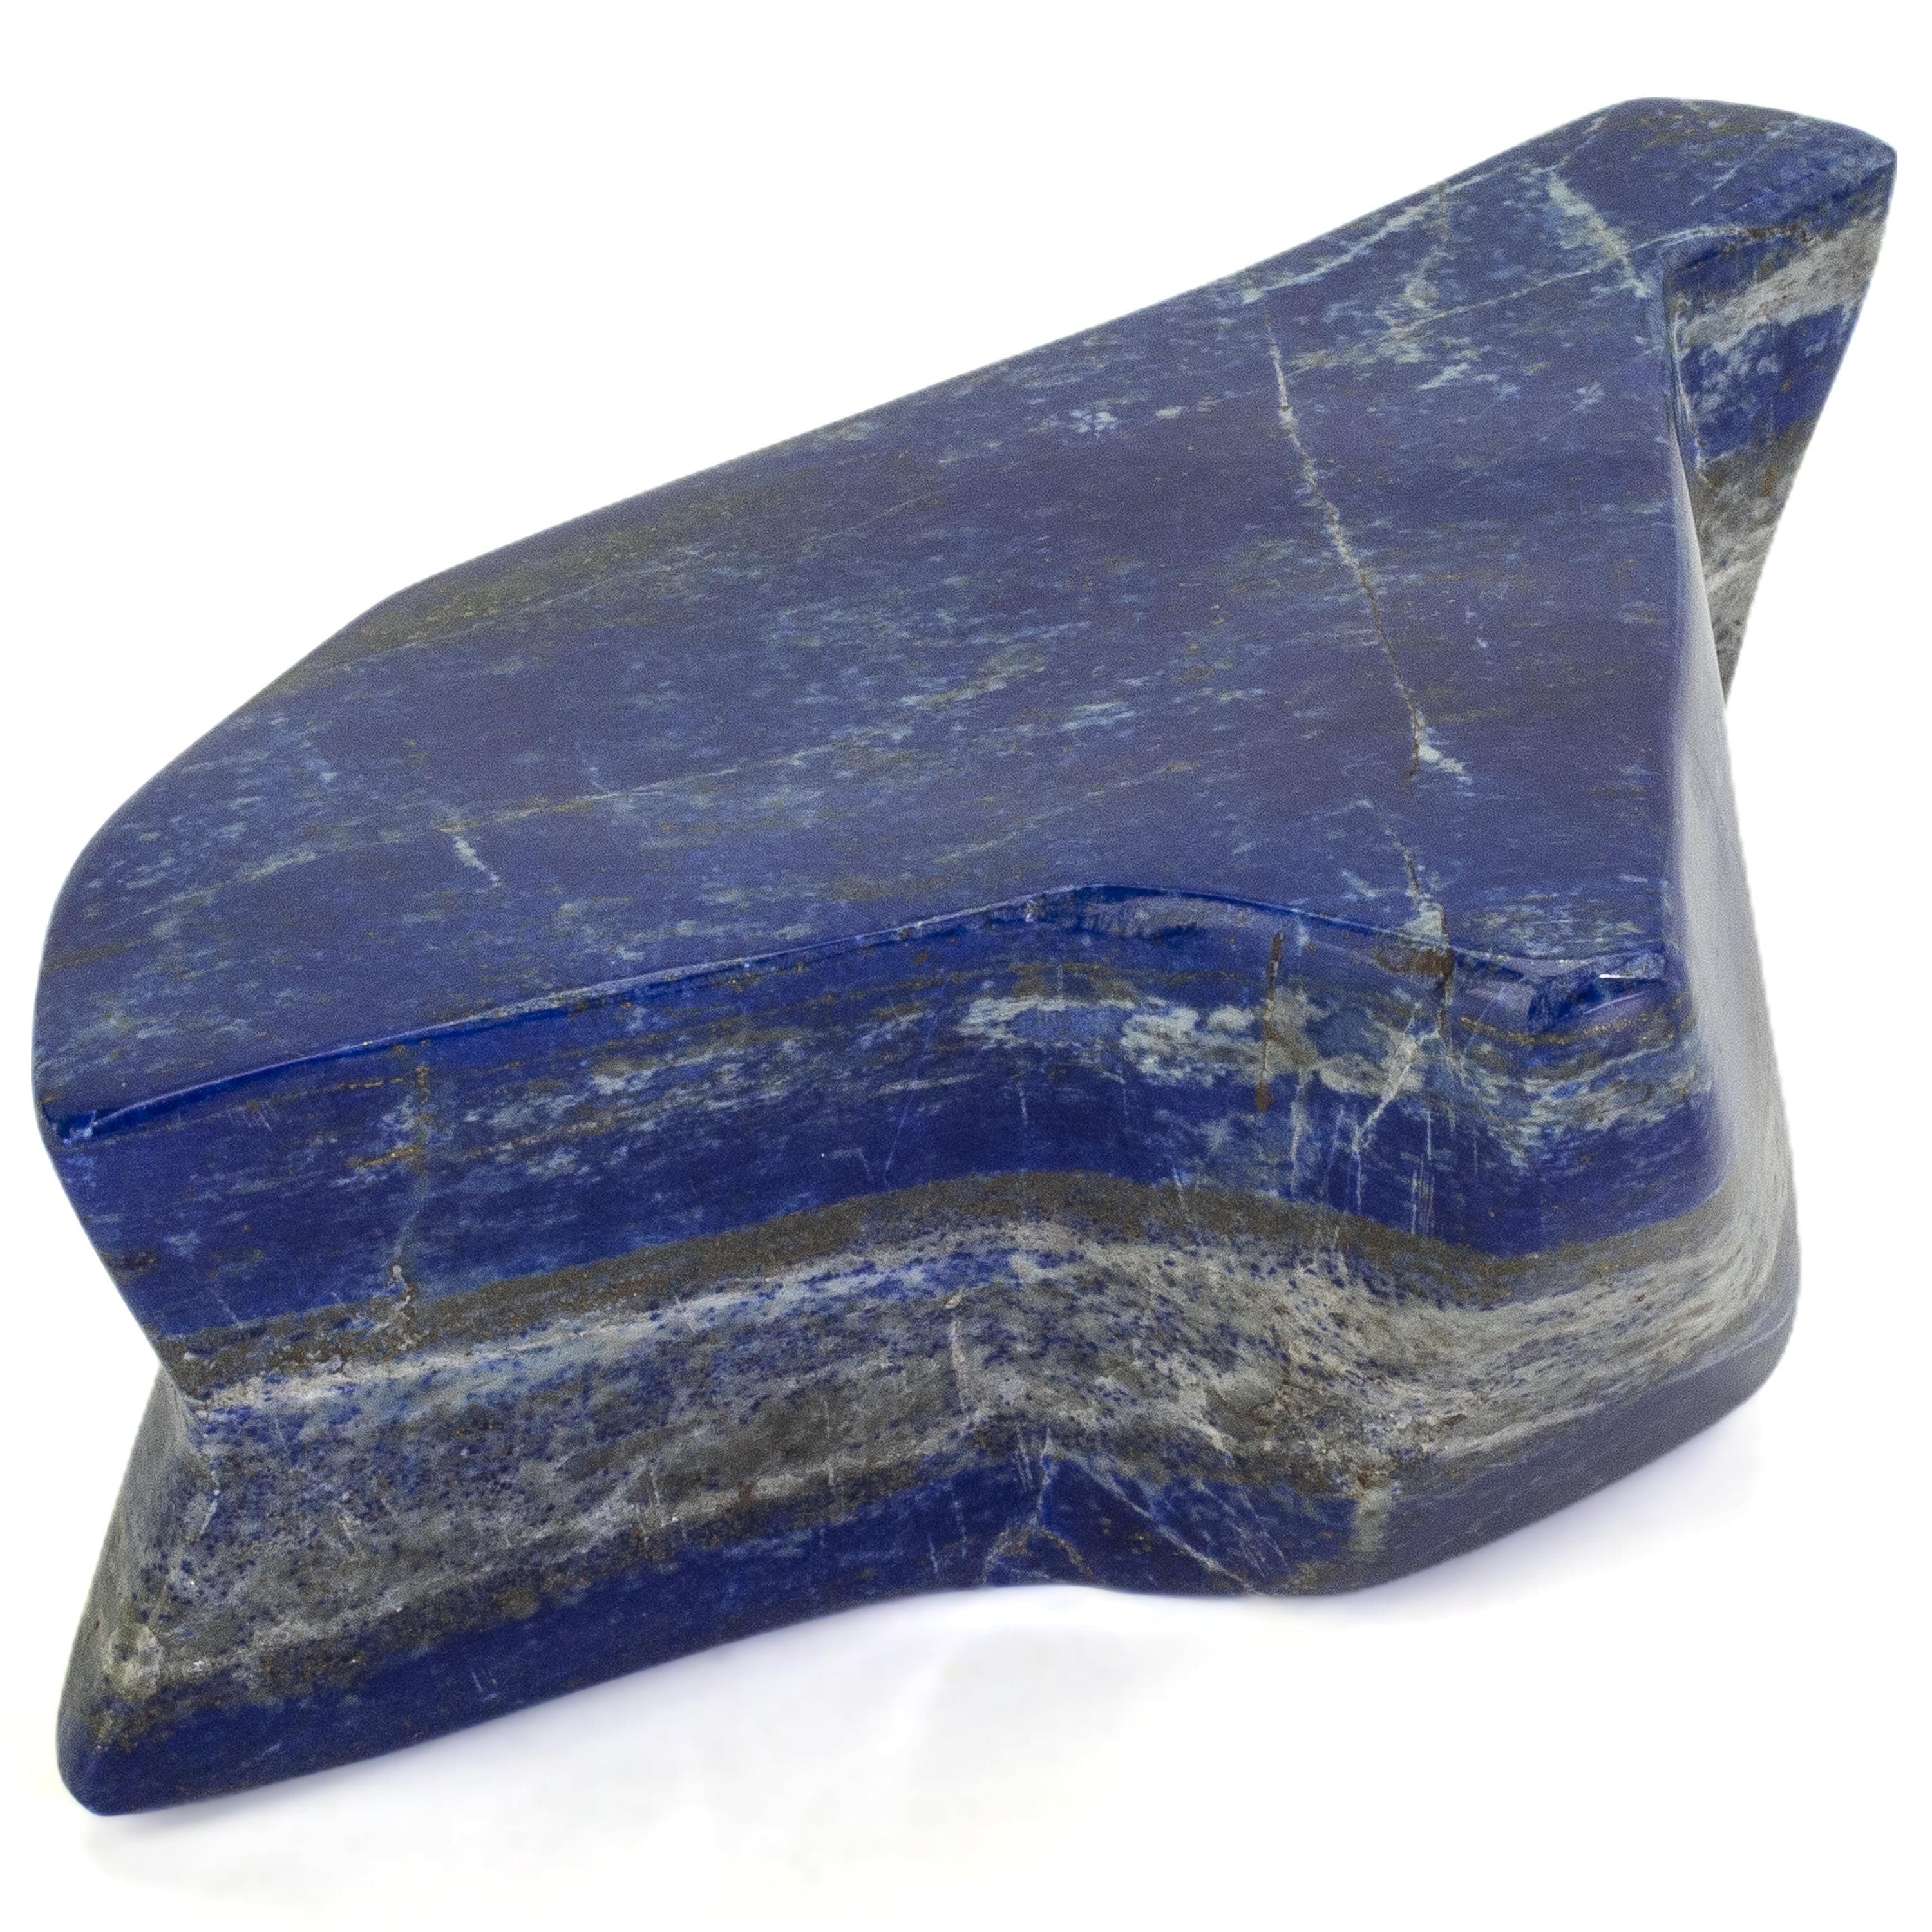 Kalifano Lapis Lapis Lazuil Freeform from Afghanistan - 1.3 kg / 2.8 lbs LP1400.003